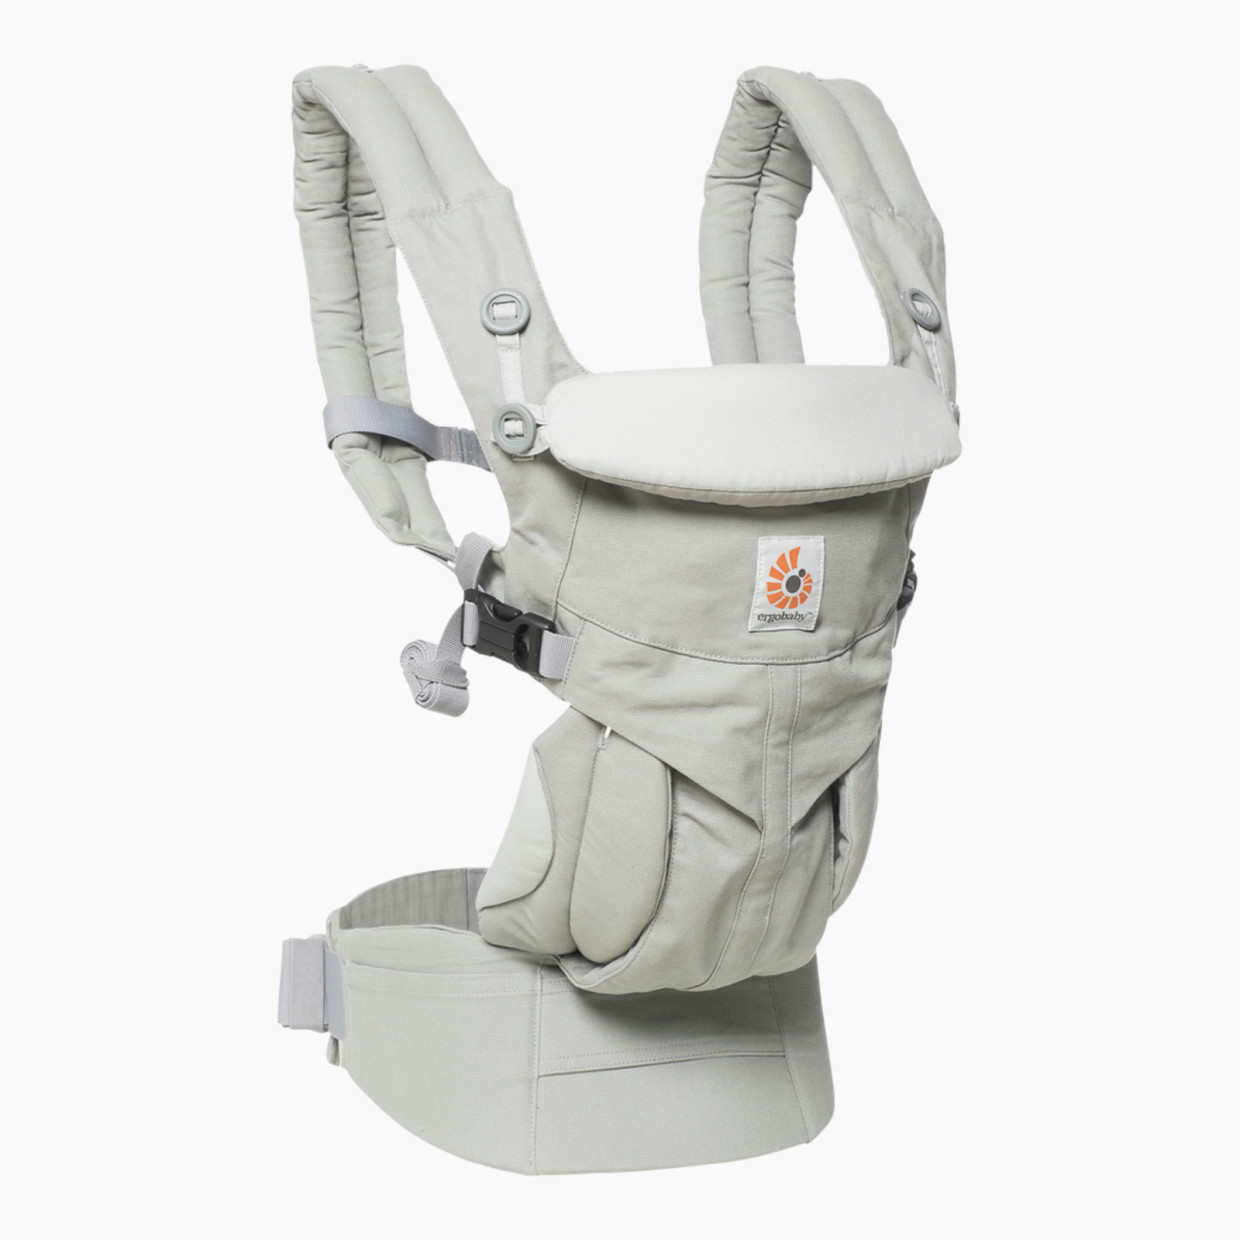 Ergobaby Omni 360 Baby Carrier - Pearl Gray